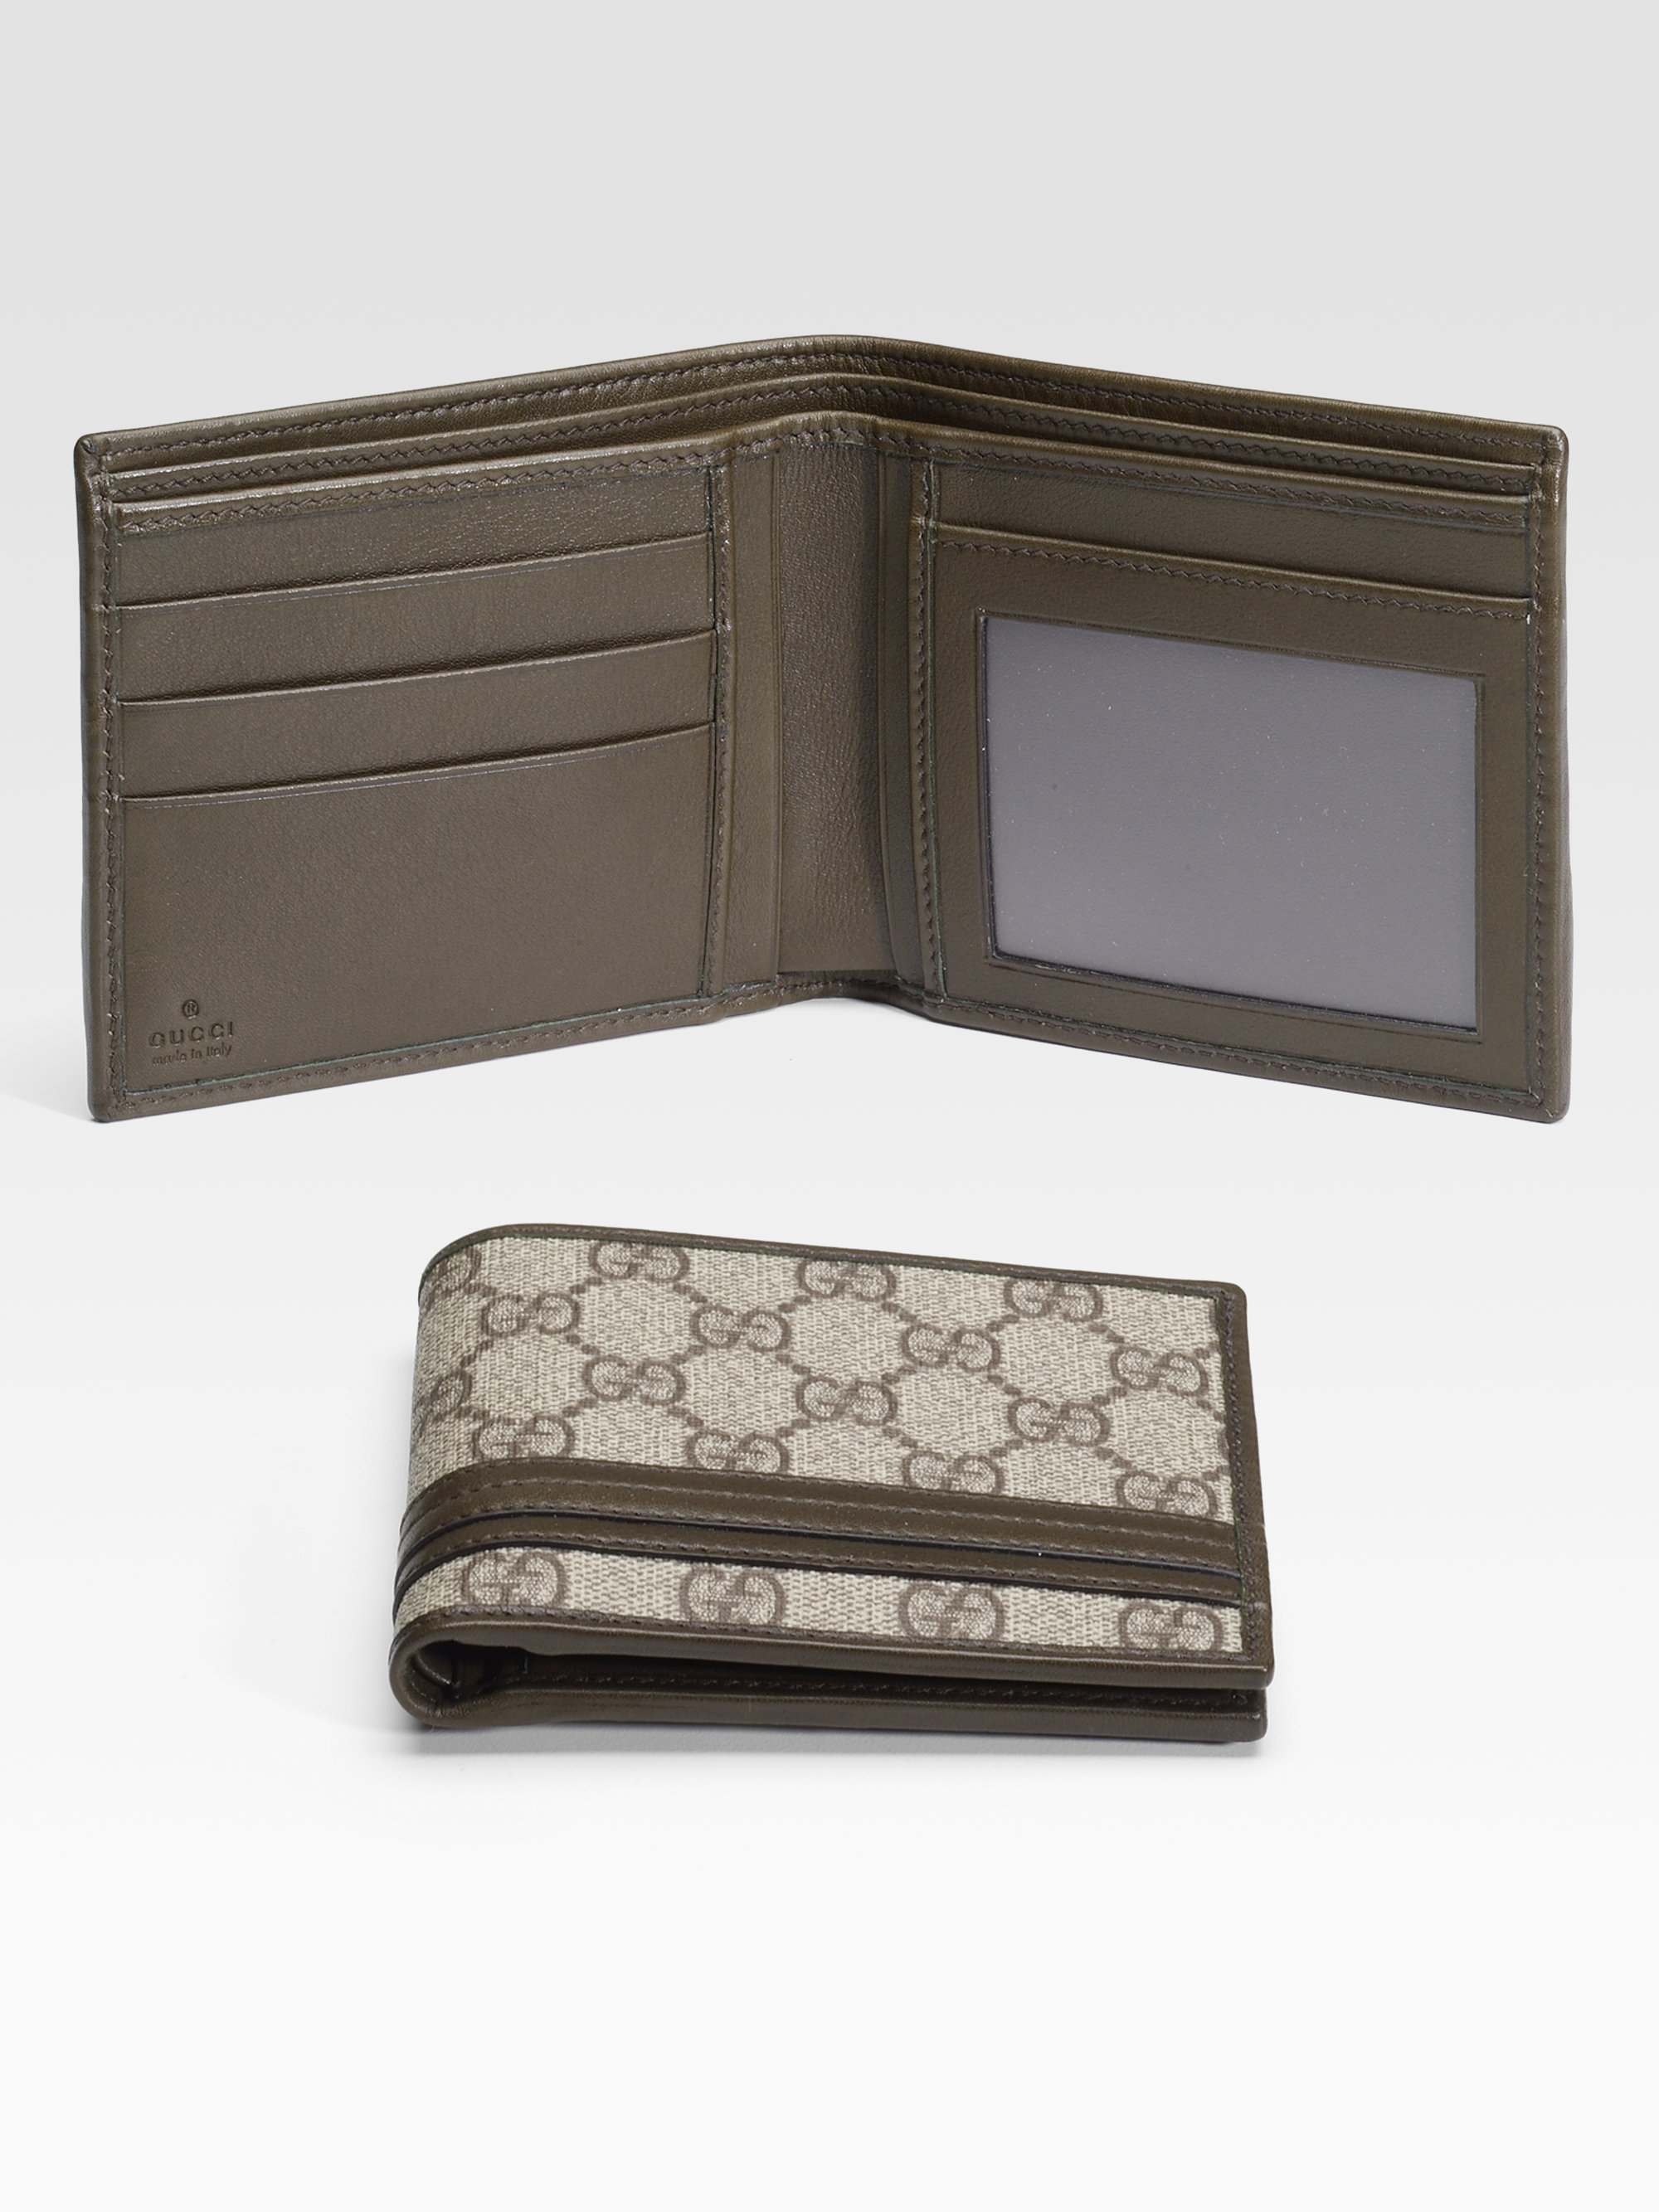 gucci front pocket wallet, OFF 73%,www 